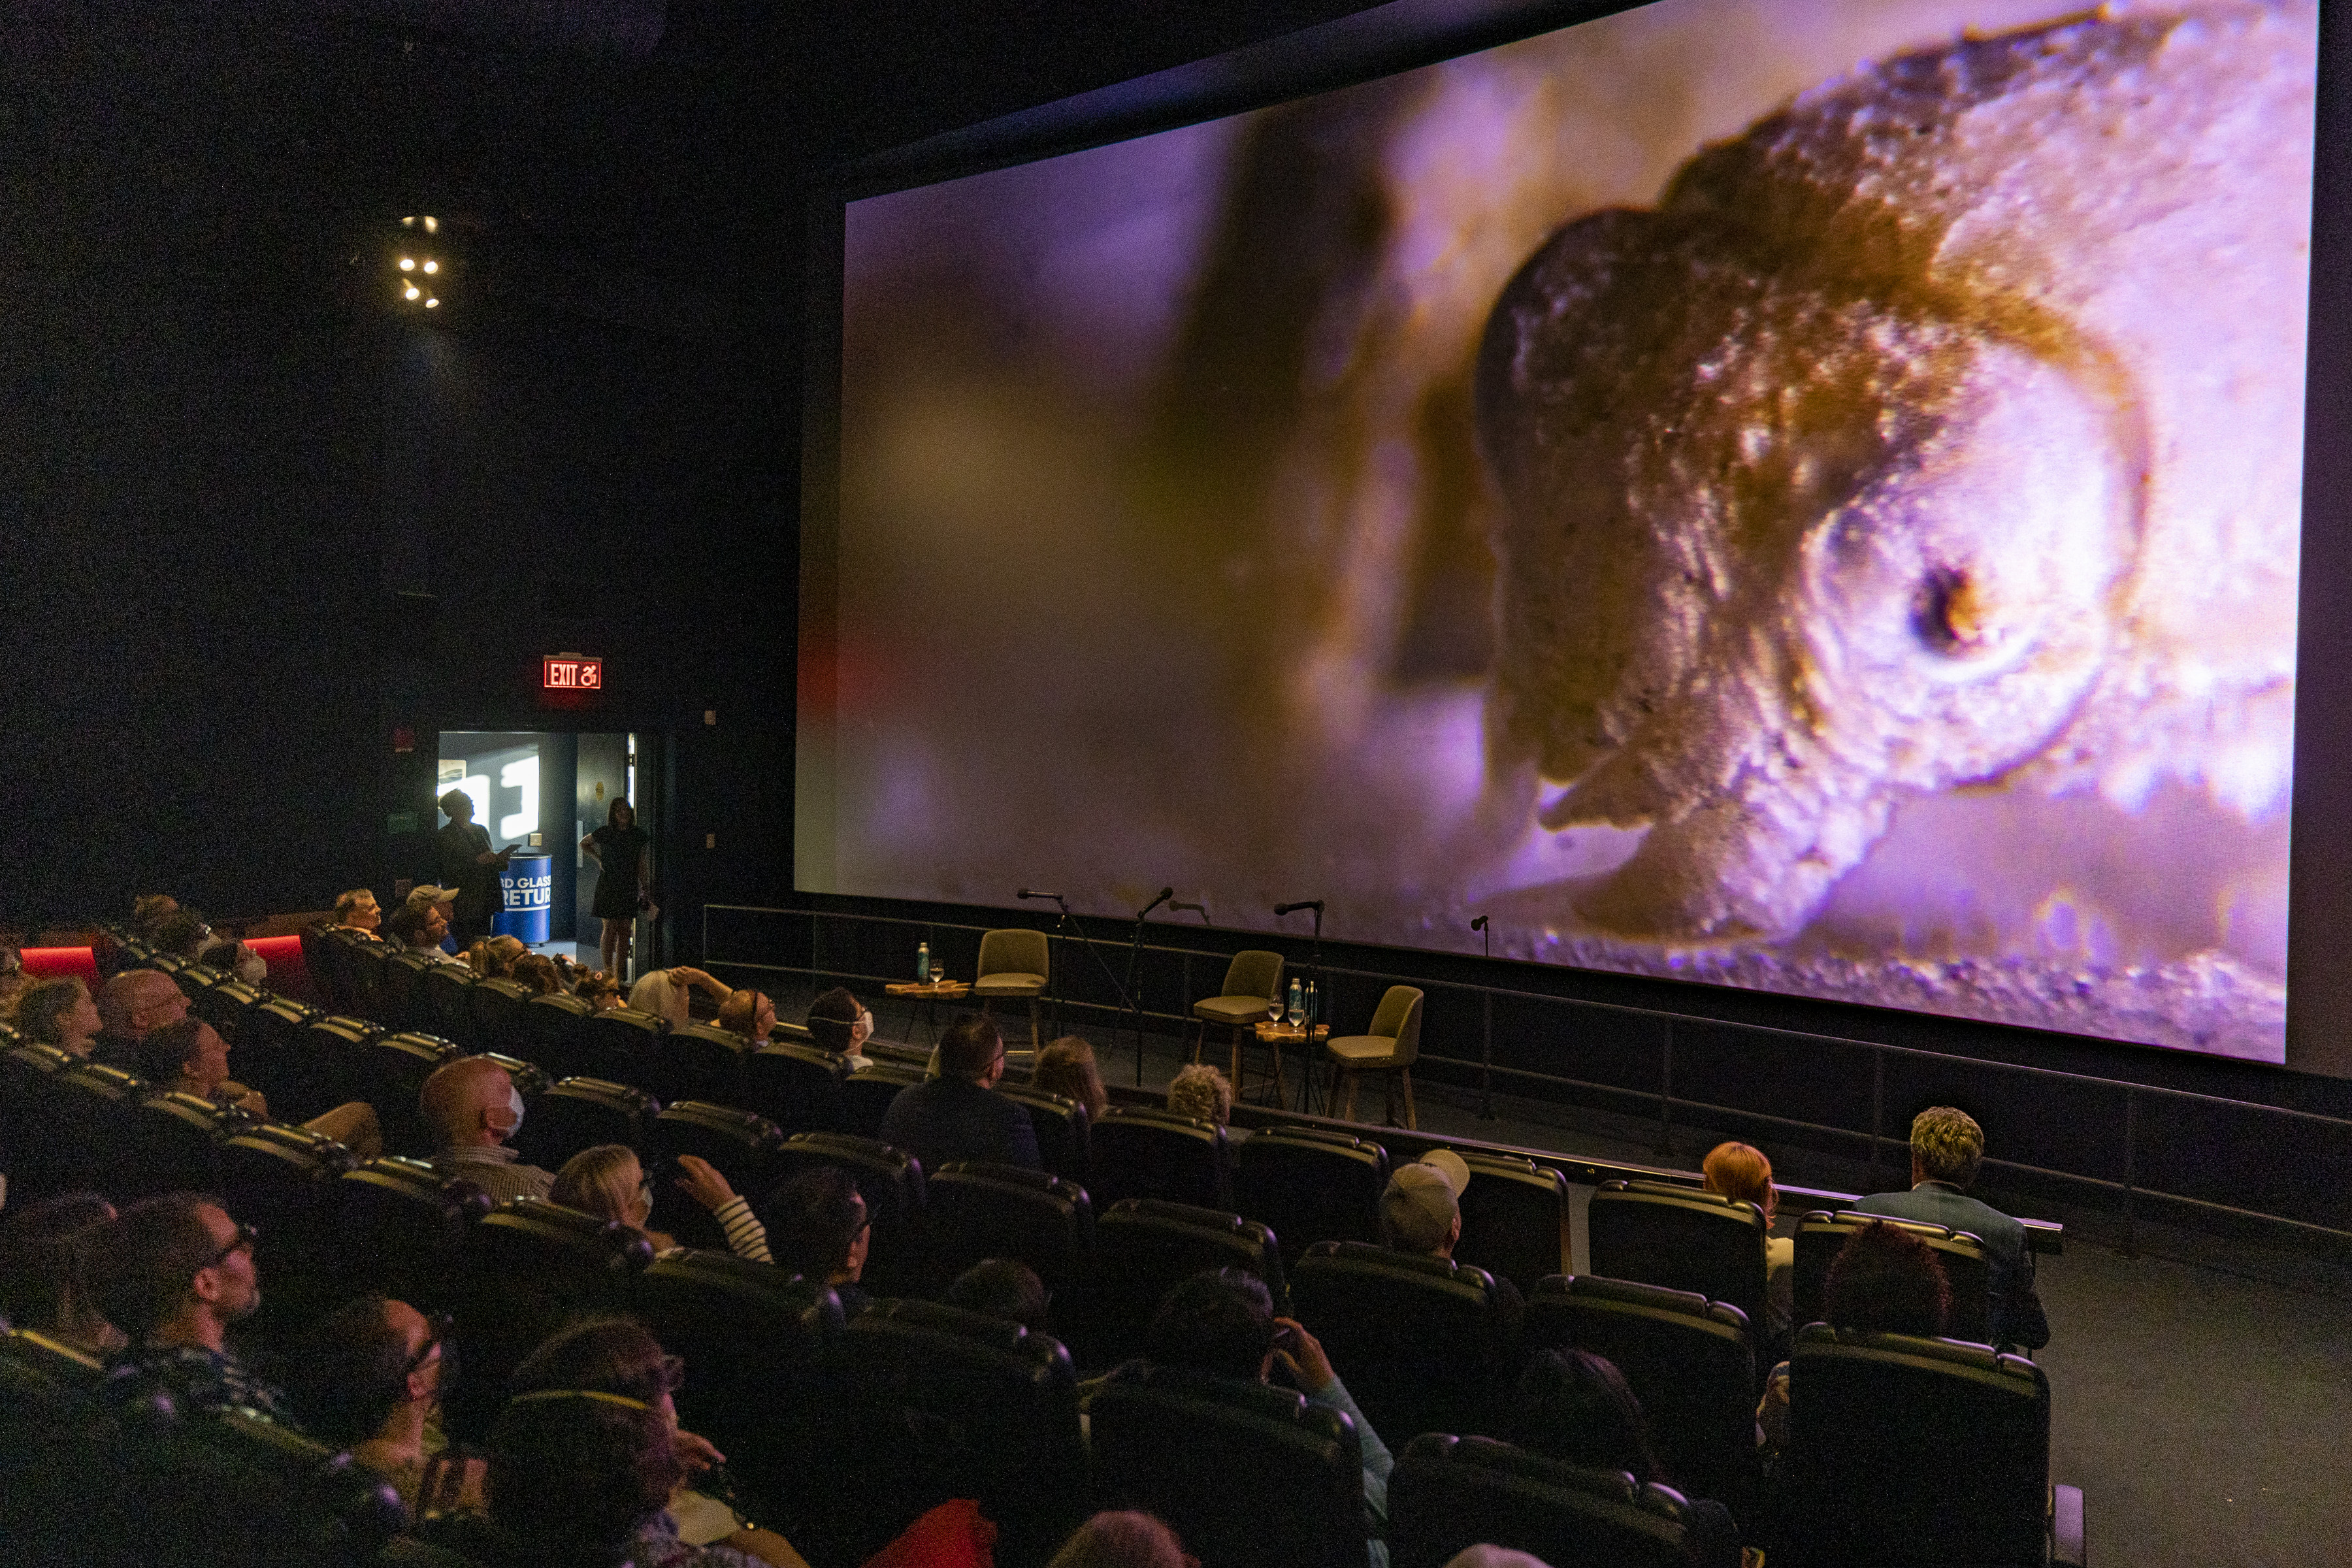 An auditorium of people looking at a cuttlefish on a movie screen.